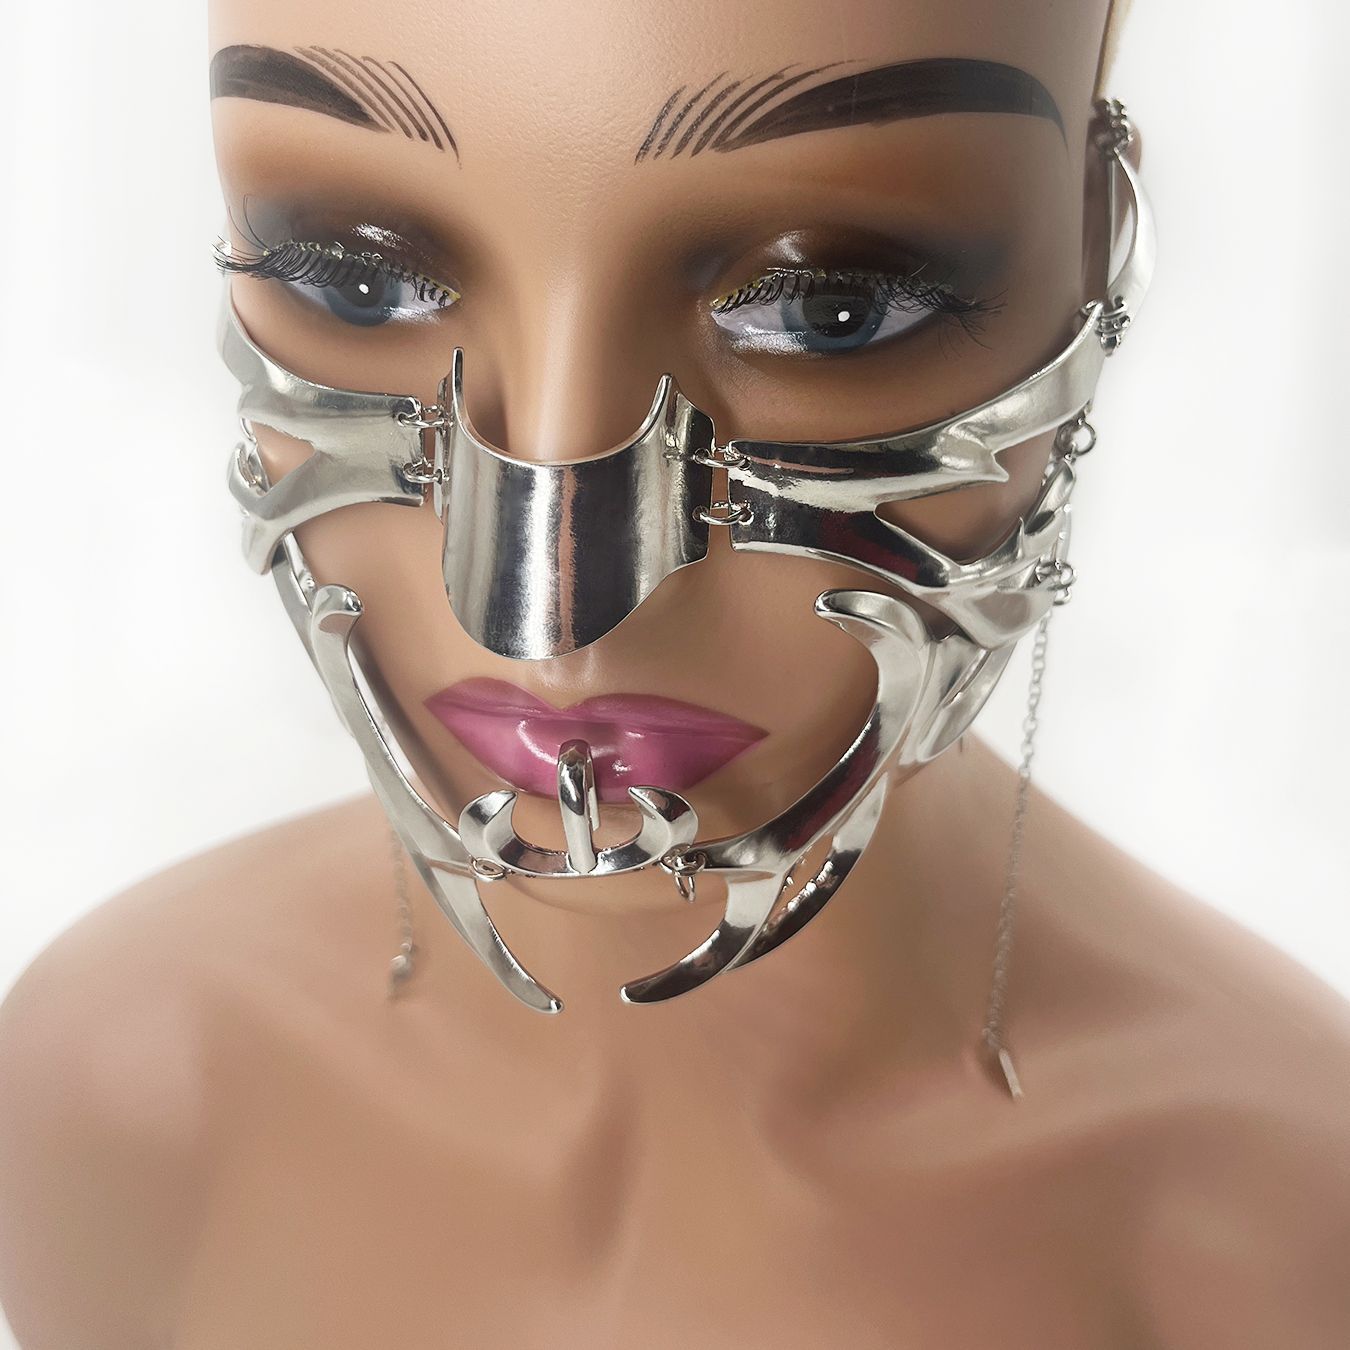 A person dressing up in a Maramalive™ Adjustable Irregular Fluid Lip Ring Mask featuring elaborate, curved designs and a dangling chain.